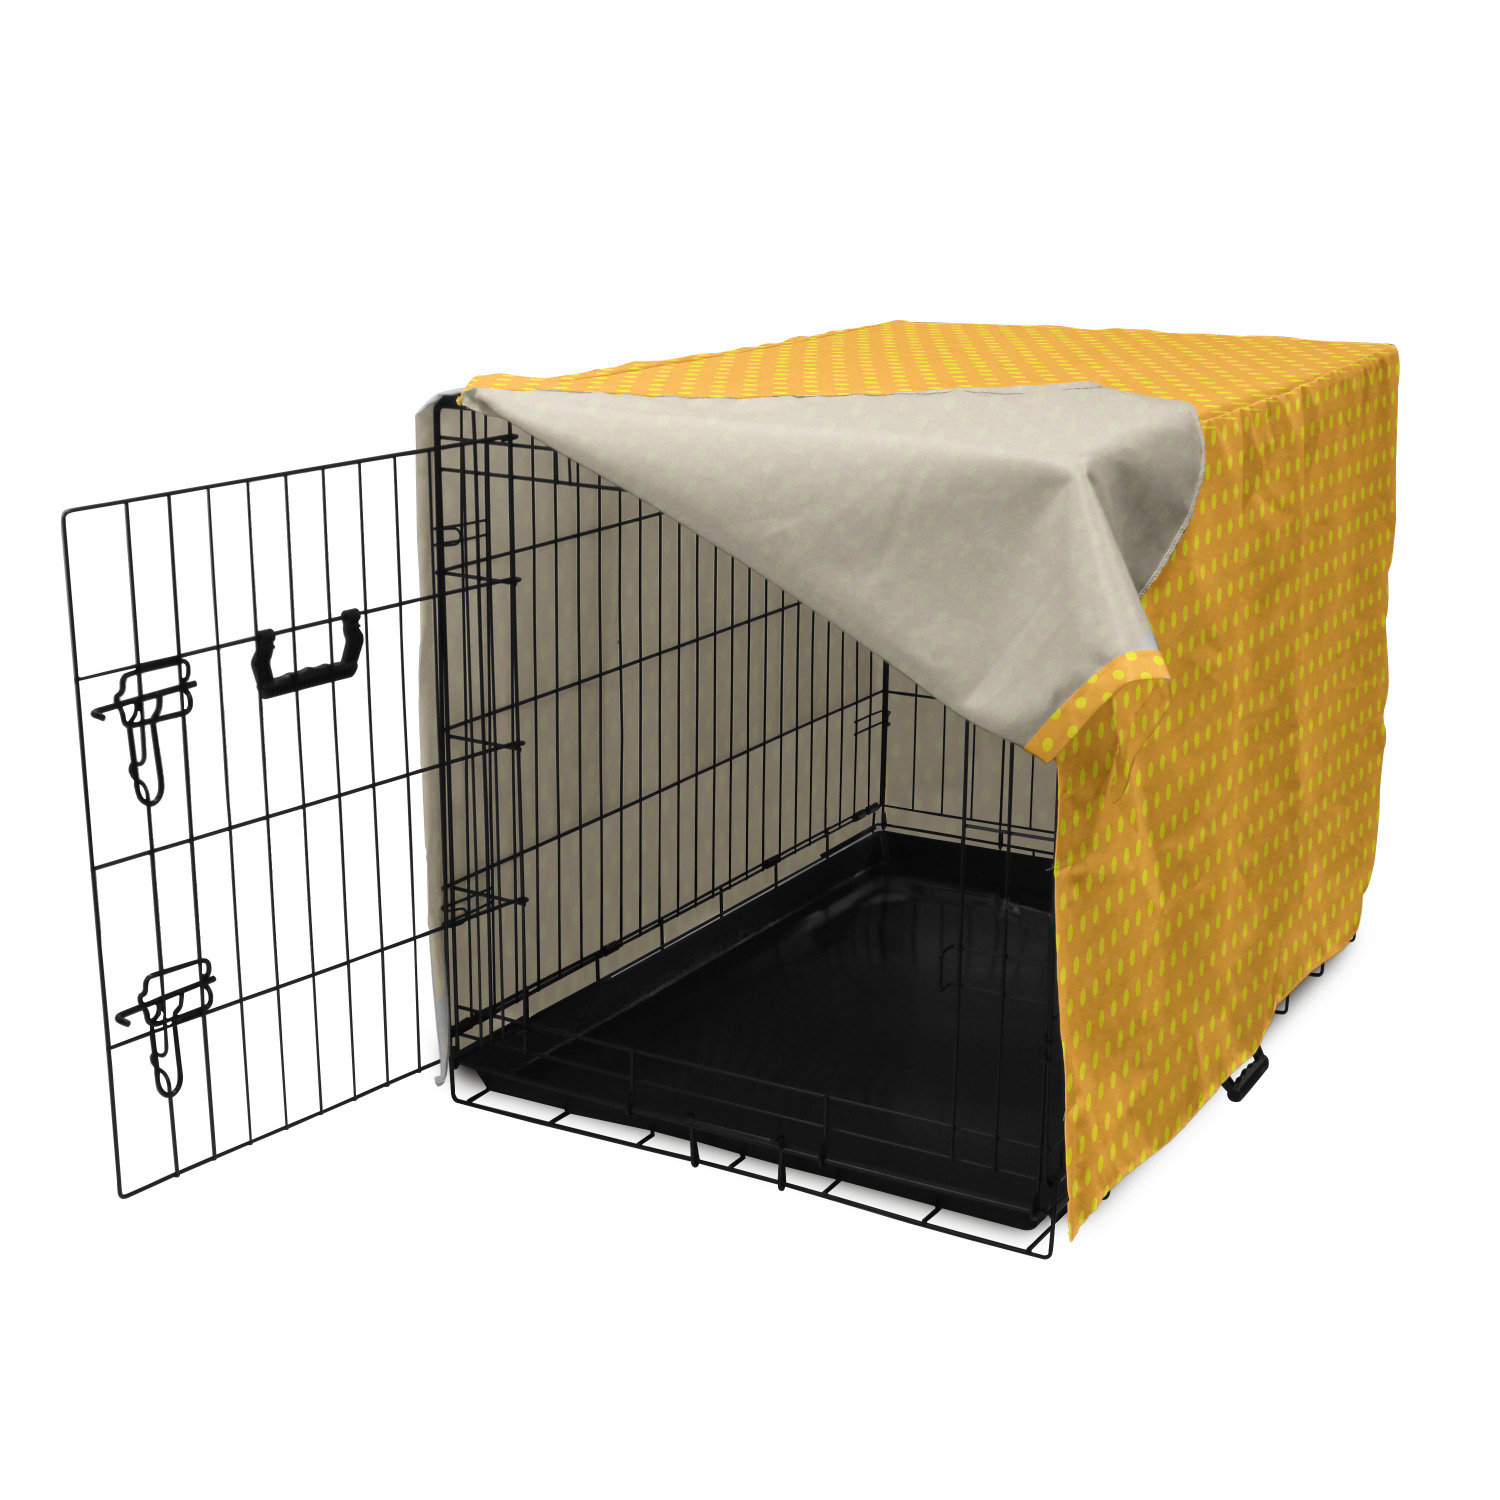 Pop Art Dog Crate Cover, Vintage Retro 50s 60s Image with Polka Dots Pattern Design Print, Easy to Use Pet Kennel Cover for Medium Large Dogs, 35" x 23" x 27", Marigold and Yellow, by Ambesonne - image 3 of 6